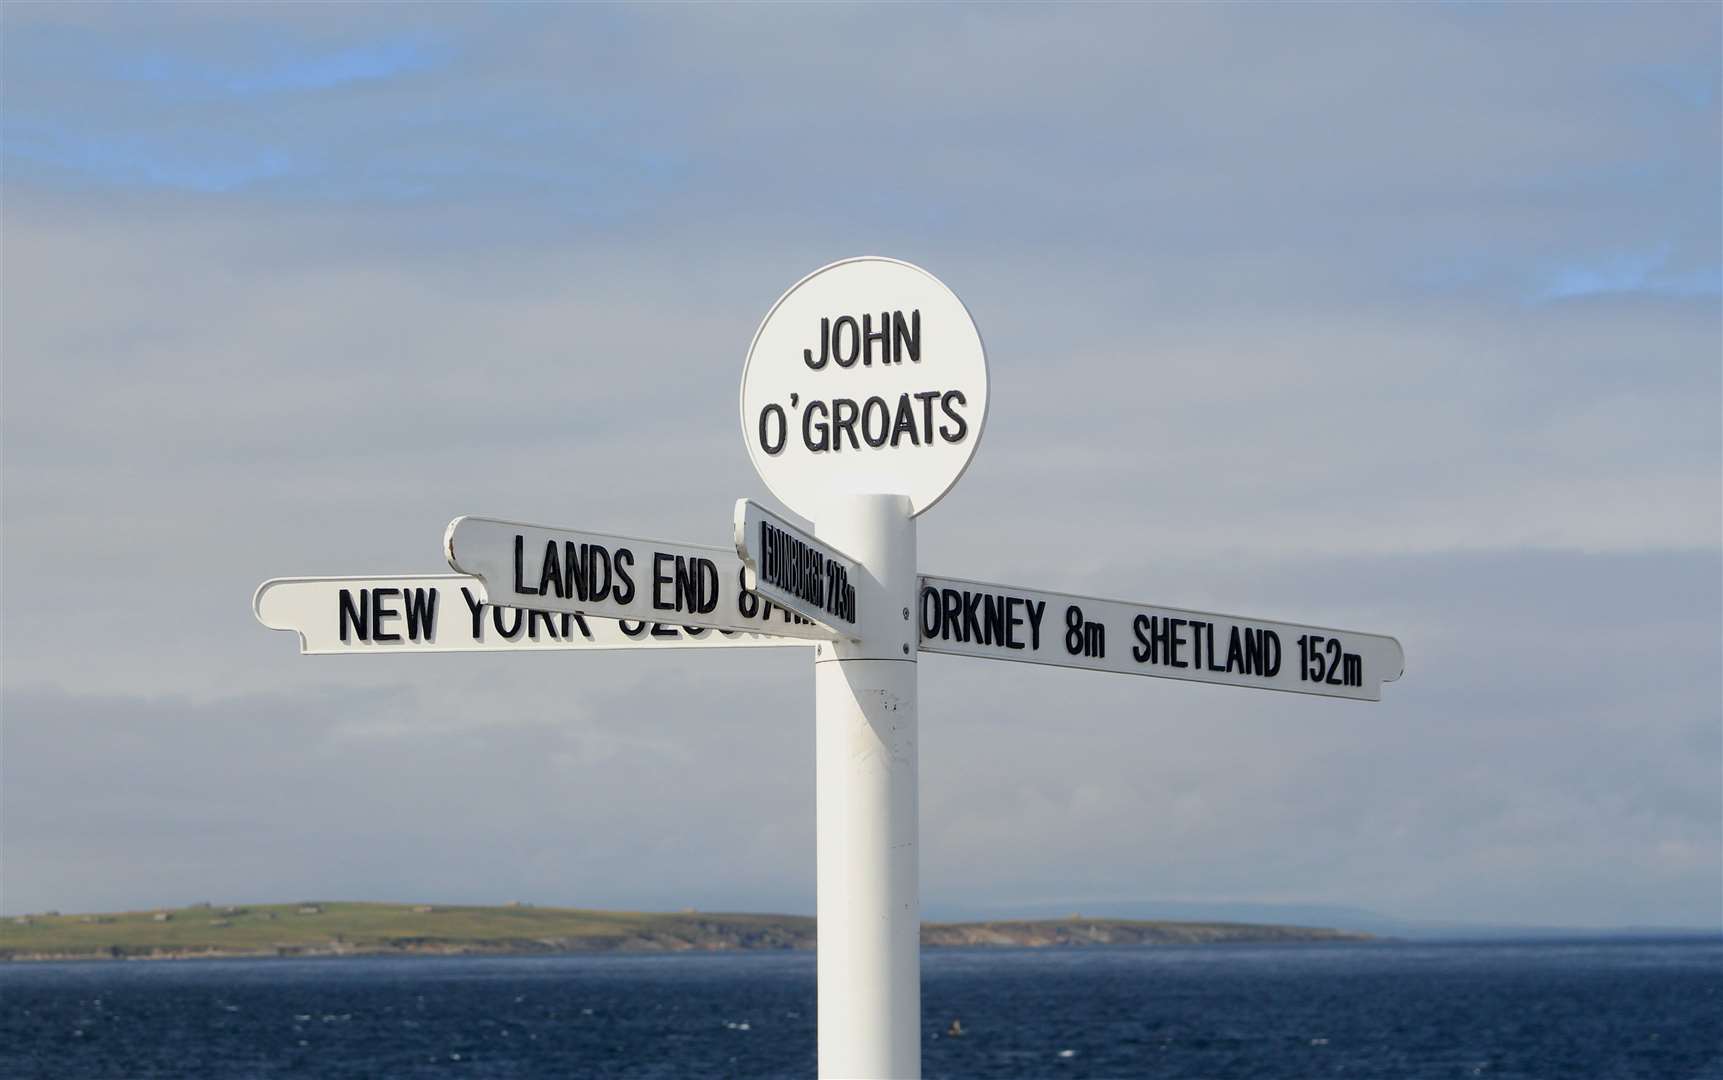 Members of the public are invited to join the proceedings at 9.15pm at the John O'Groats signpost and follow the torches to the lighting ceremony.